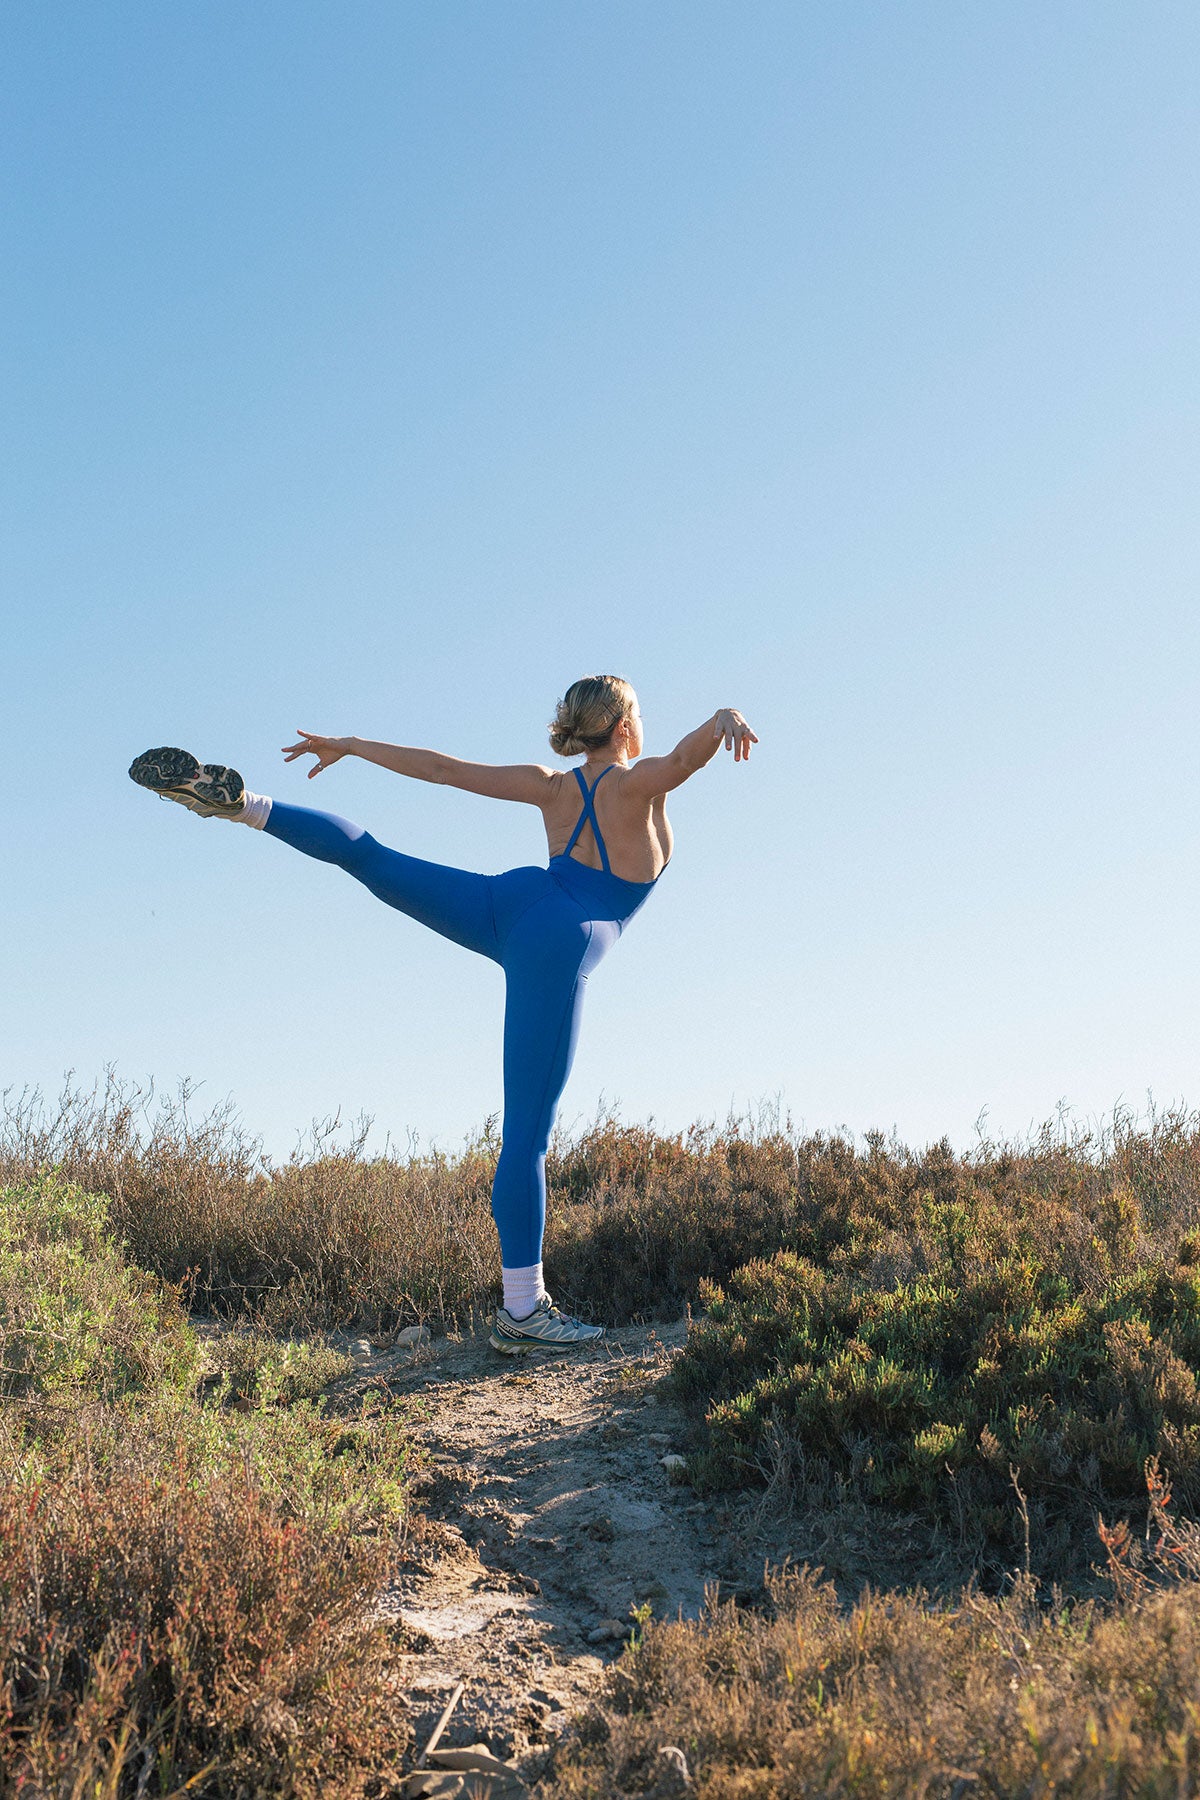 Wear One's At image of model extending leg on a hiking trail wearing a blue unitard